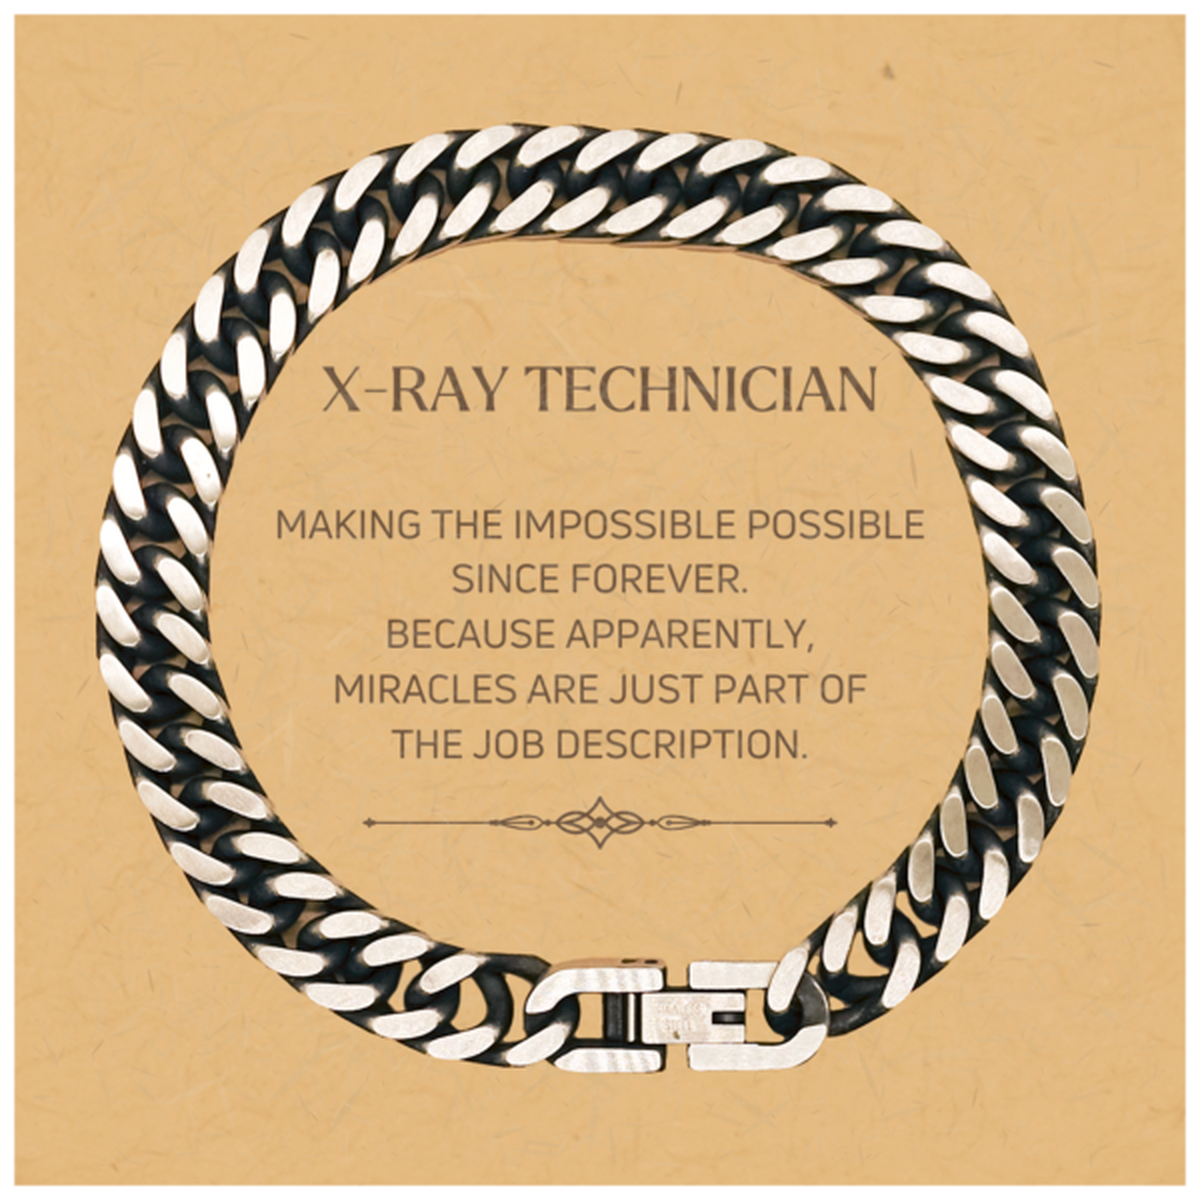 Funny X-Ray Technician Gifts, Miracles are just part of the job description, Inspirational Birthday Christmas Cuban Link Chain Bracelet For X-Ray Technician, Men, Women, Coworkers, Friends, Boss